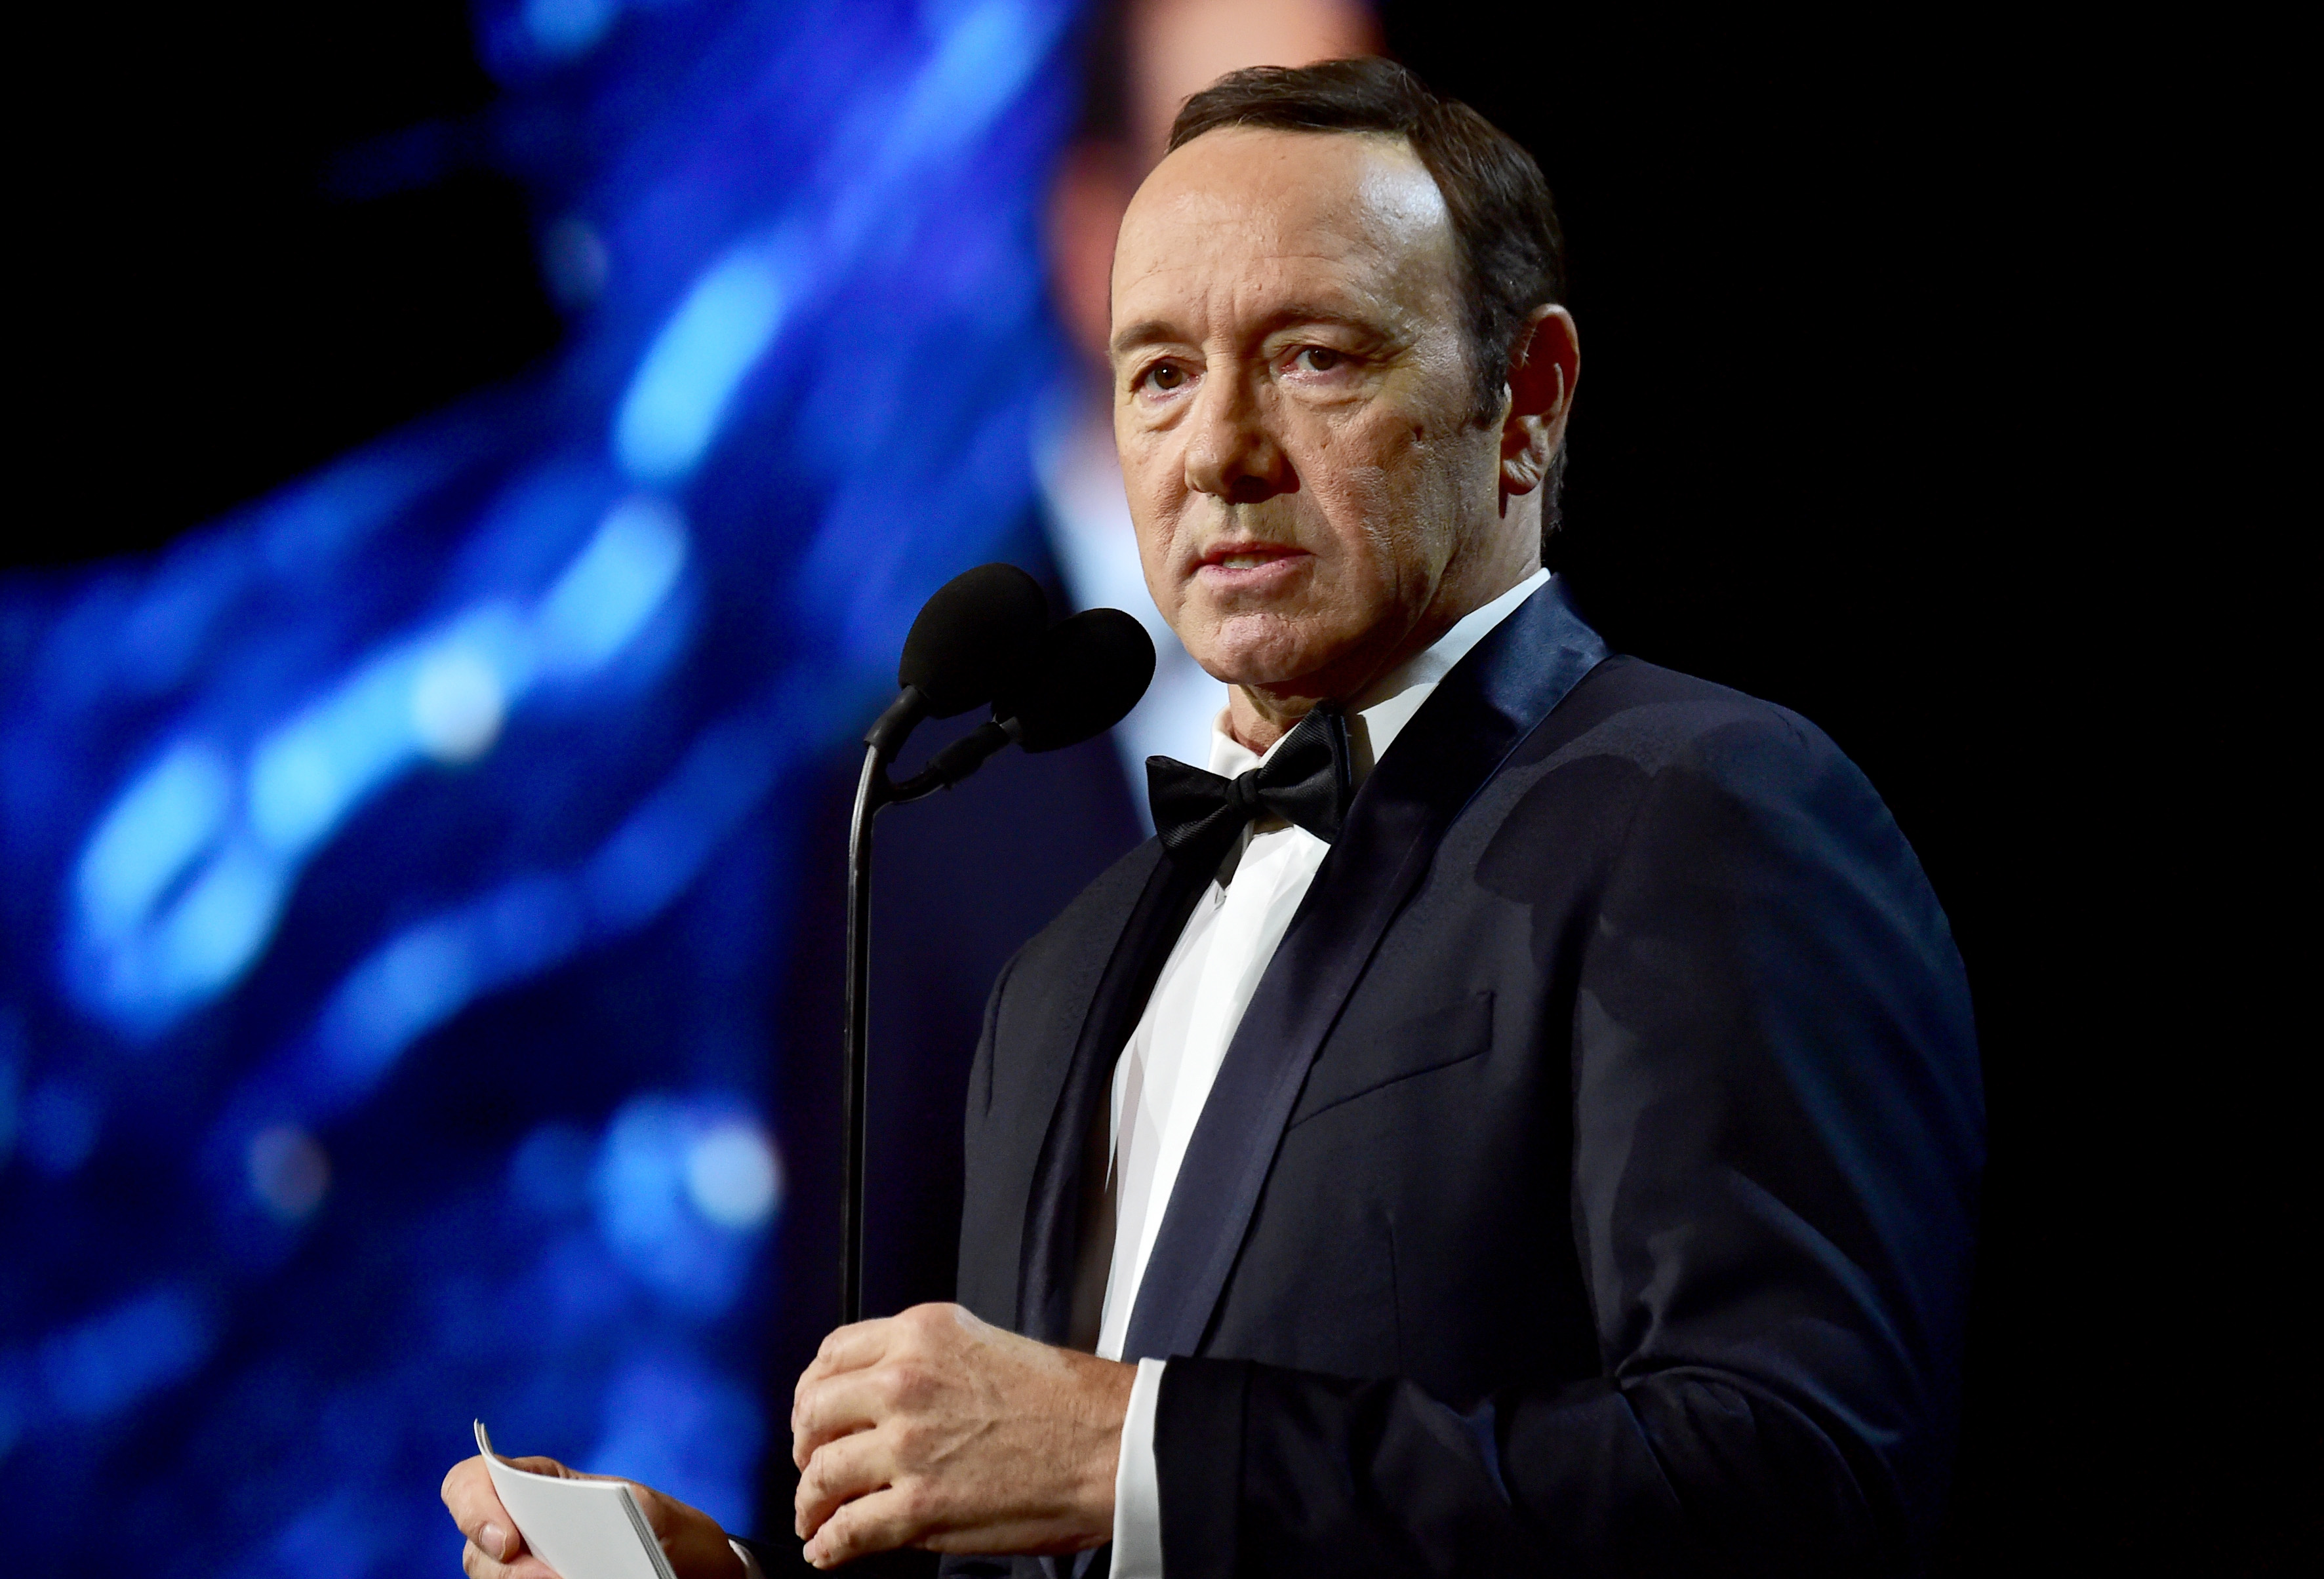 Kevin Spacey speaks onstage at the 2017 AMD British Academy Britannia Awards Presented by American Airlines And Jaguar Land Rover at The Beverly Hilton Hotel in Beverly Hills, on Oct. 27, 2017. (Frazer Harrison/BAFTA LA—Getty Images)